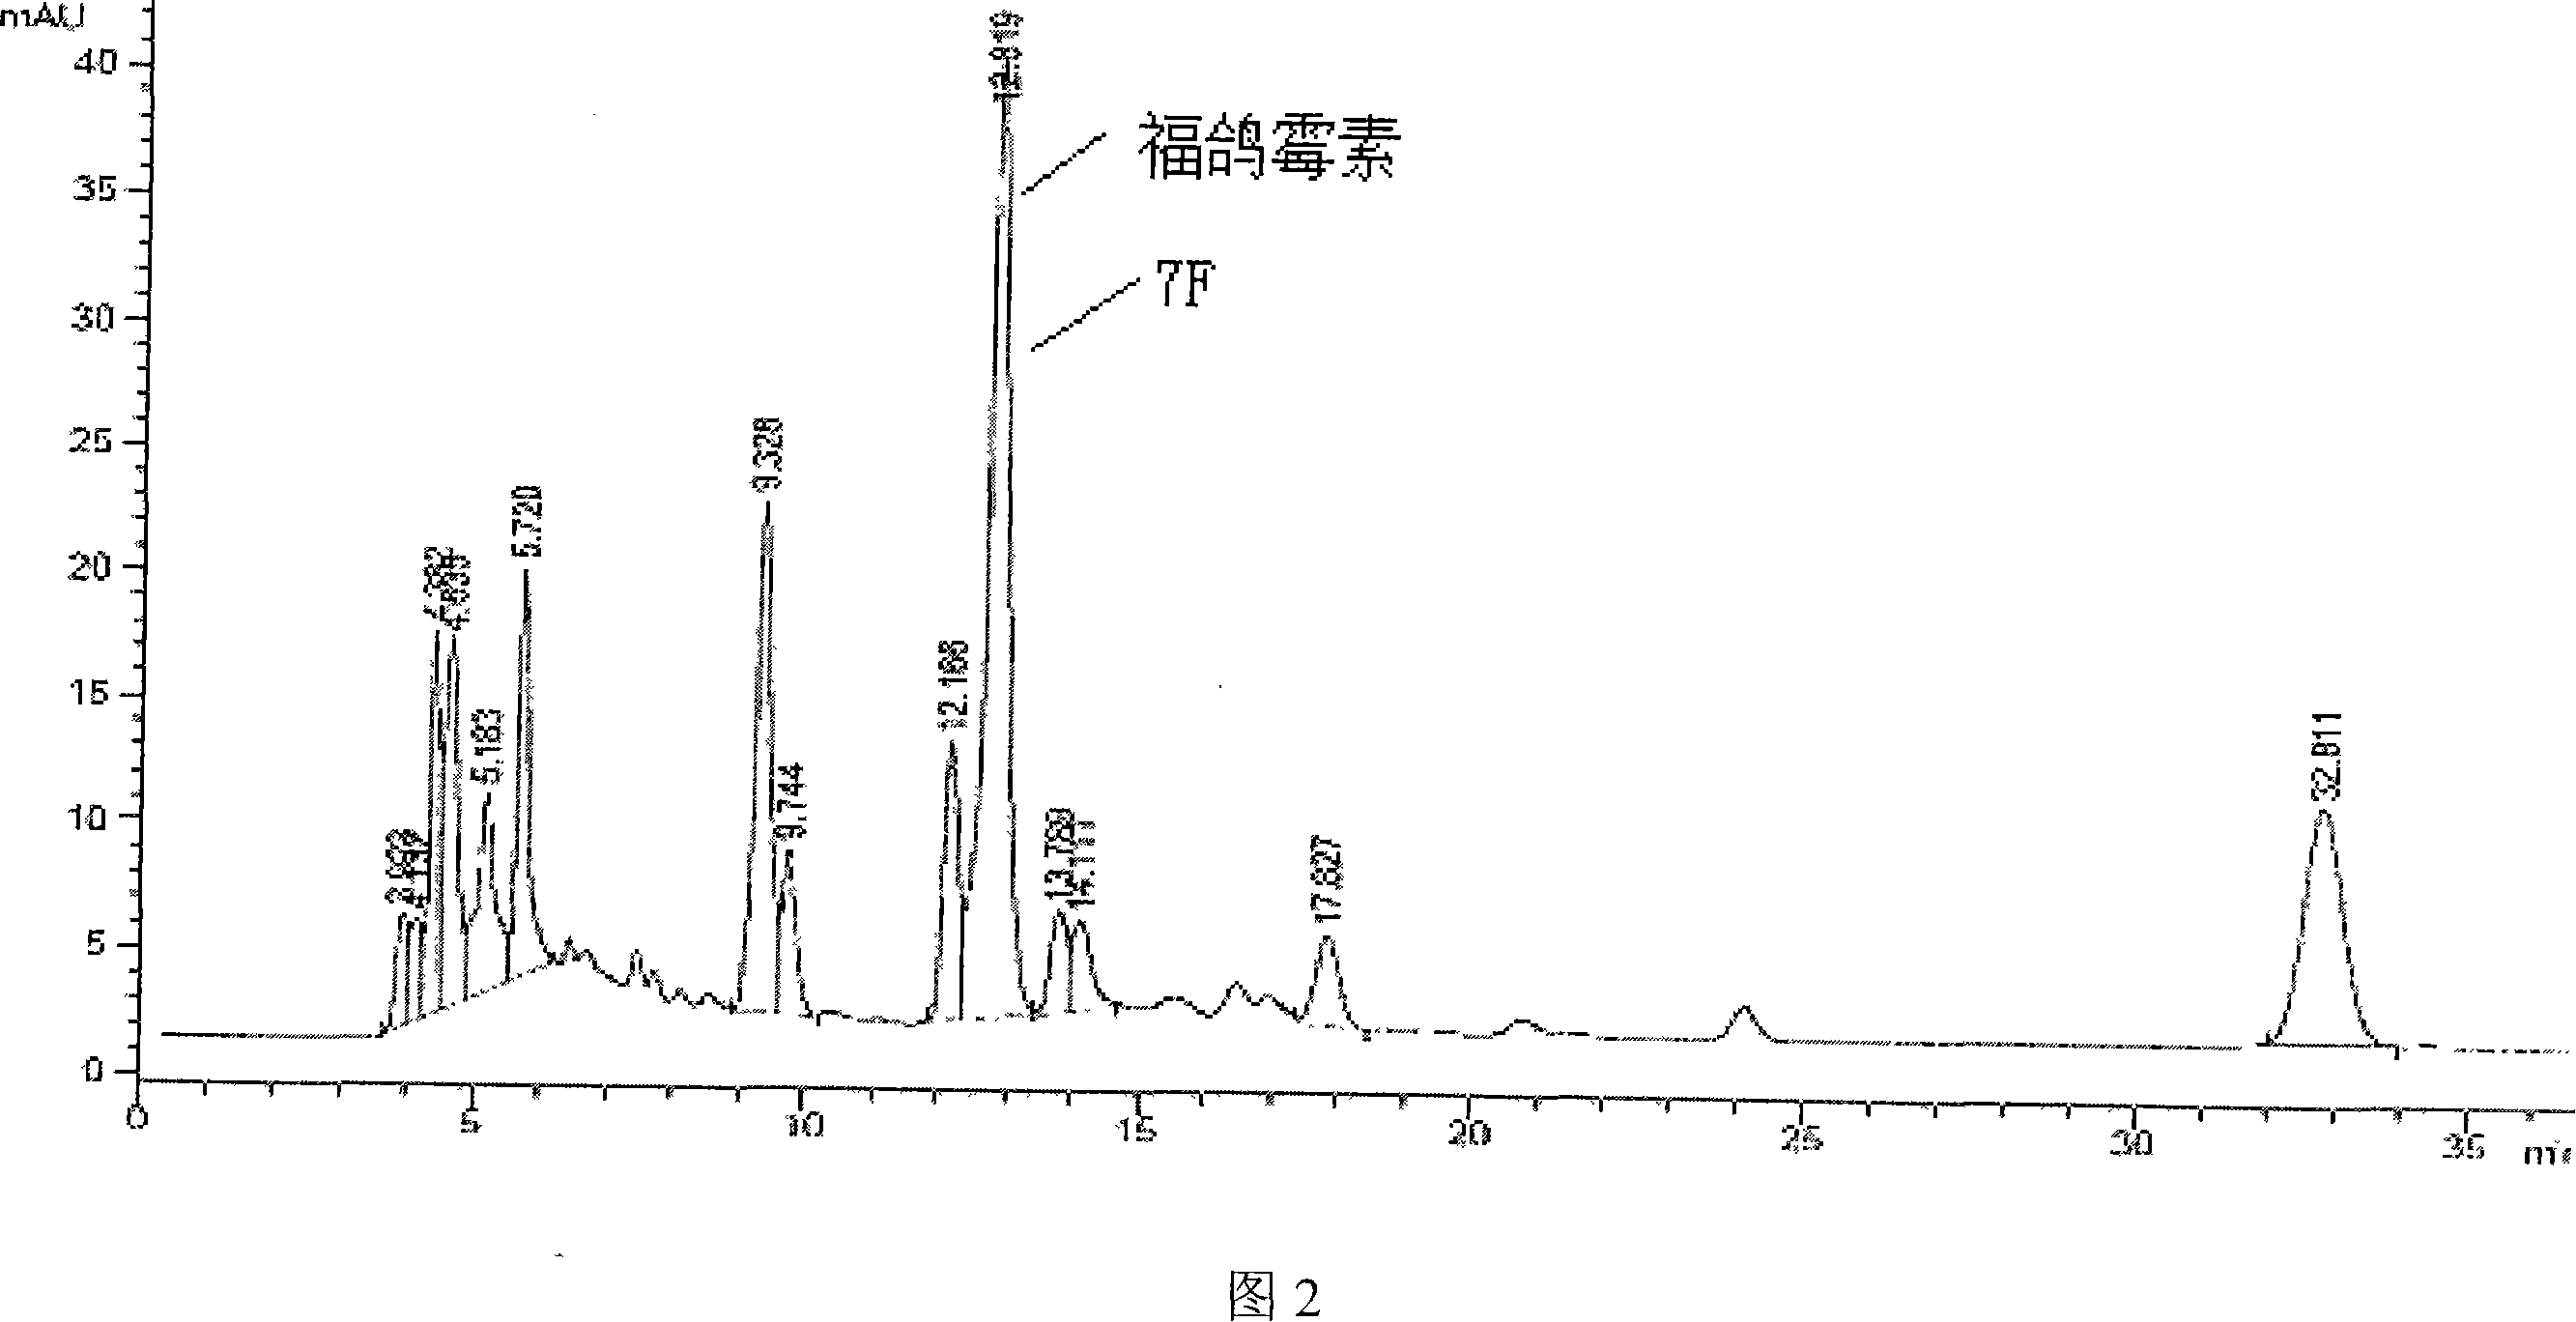 Sorangium cellulosum, preparation method and application for Phoxalone fermented by the same